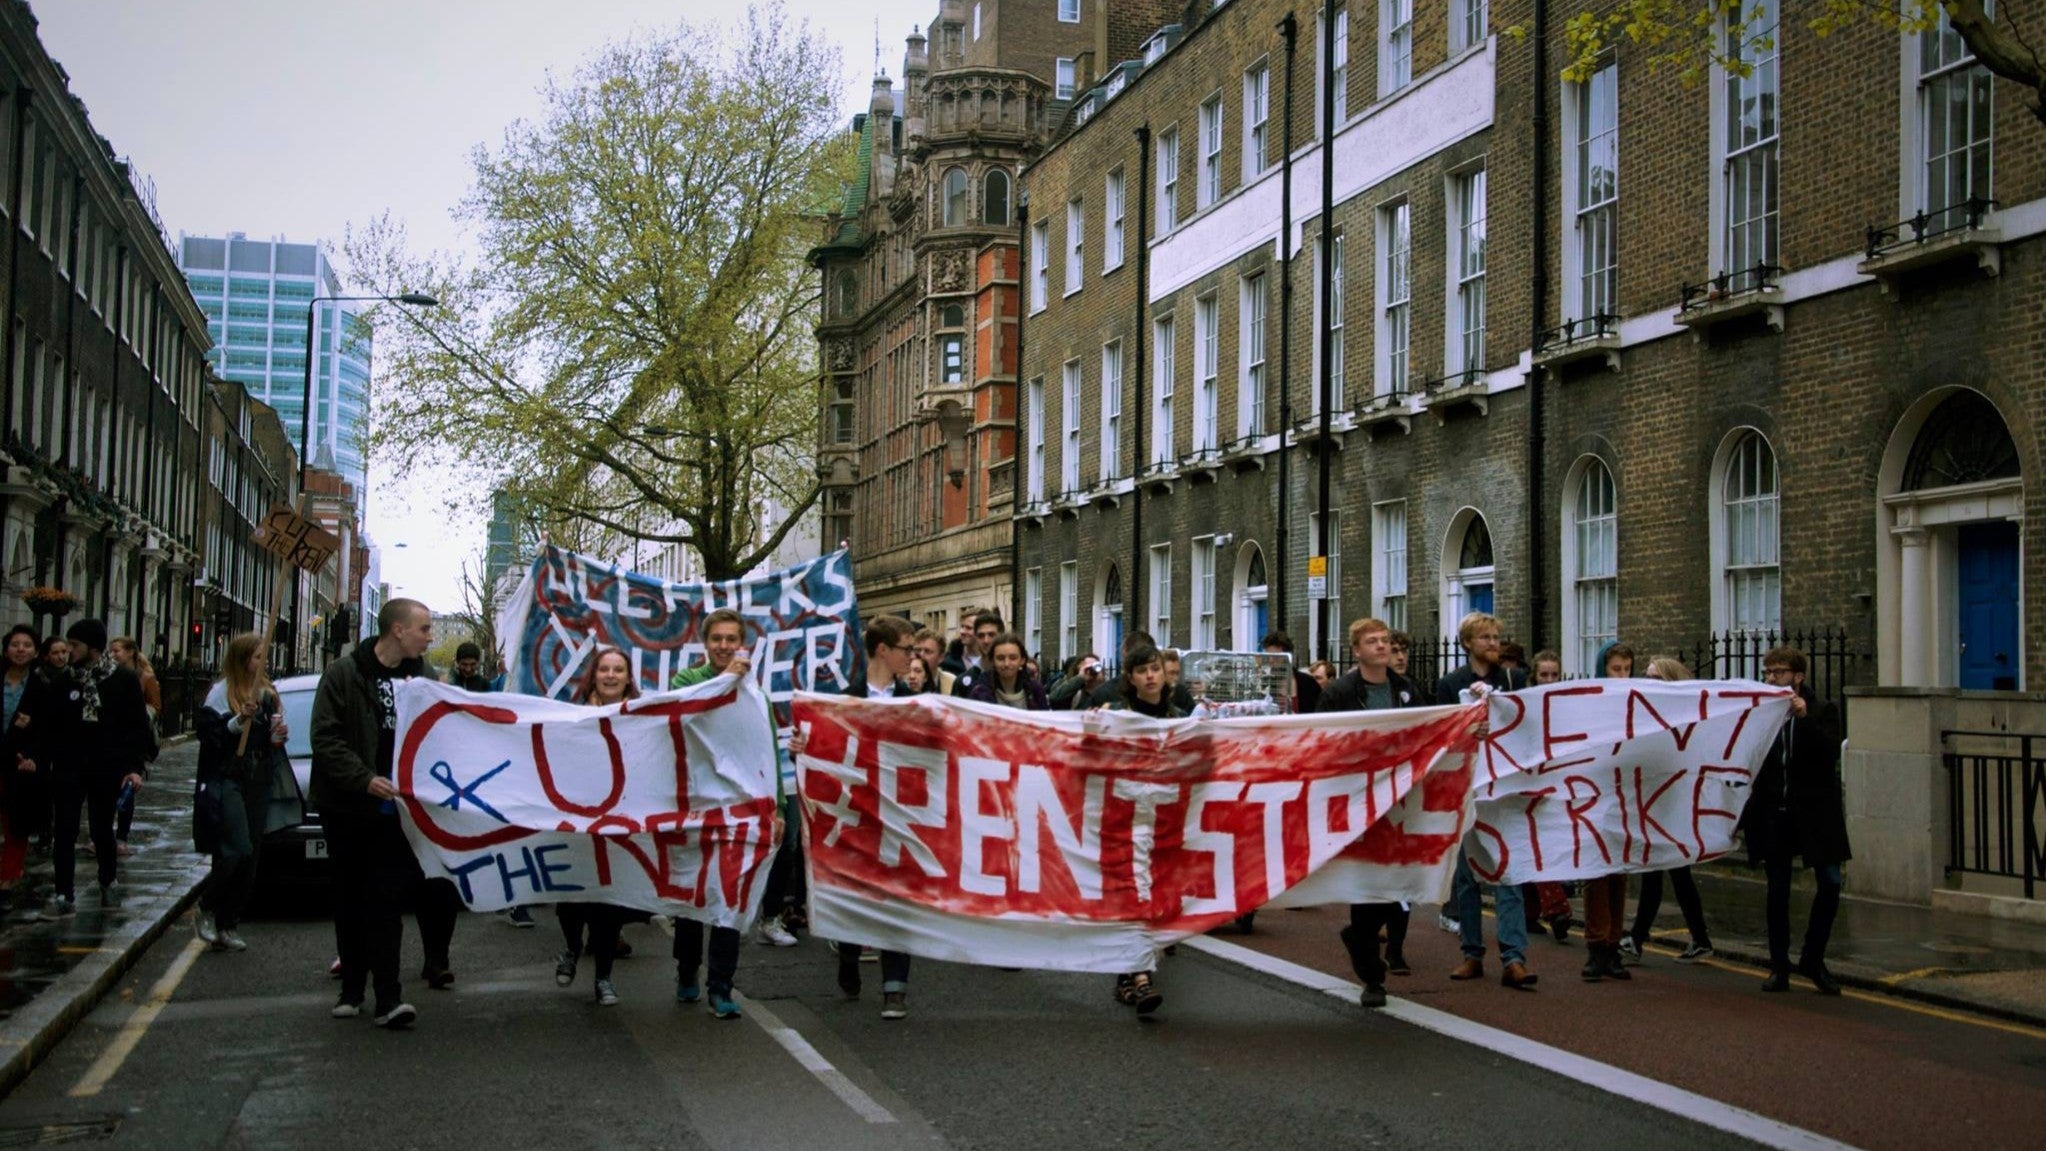 UCL student protesters, pictured, had been taking action against rising accommodation costs since the beginning of the year